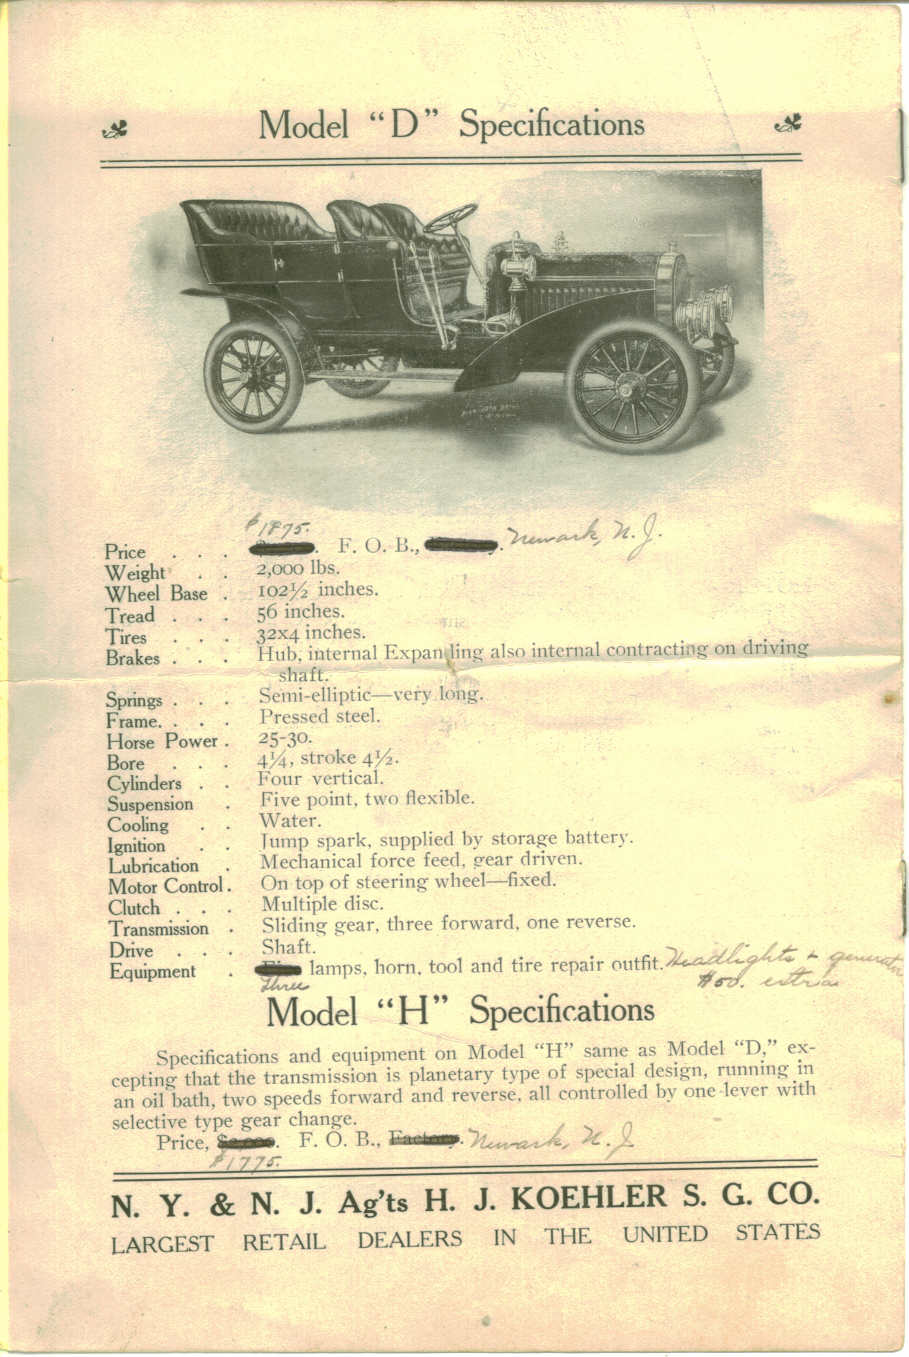 1907 Buick Booklet-07